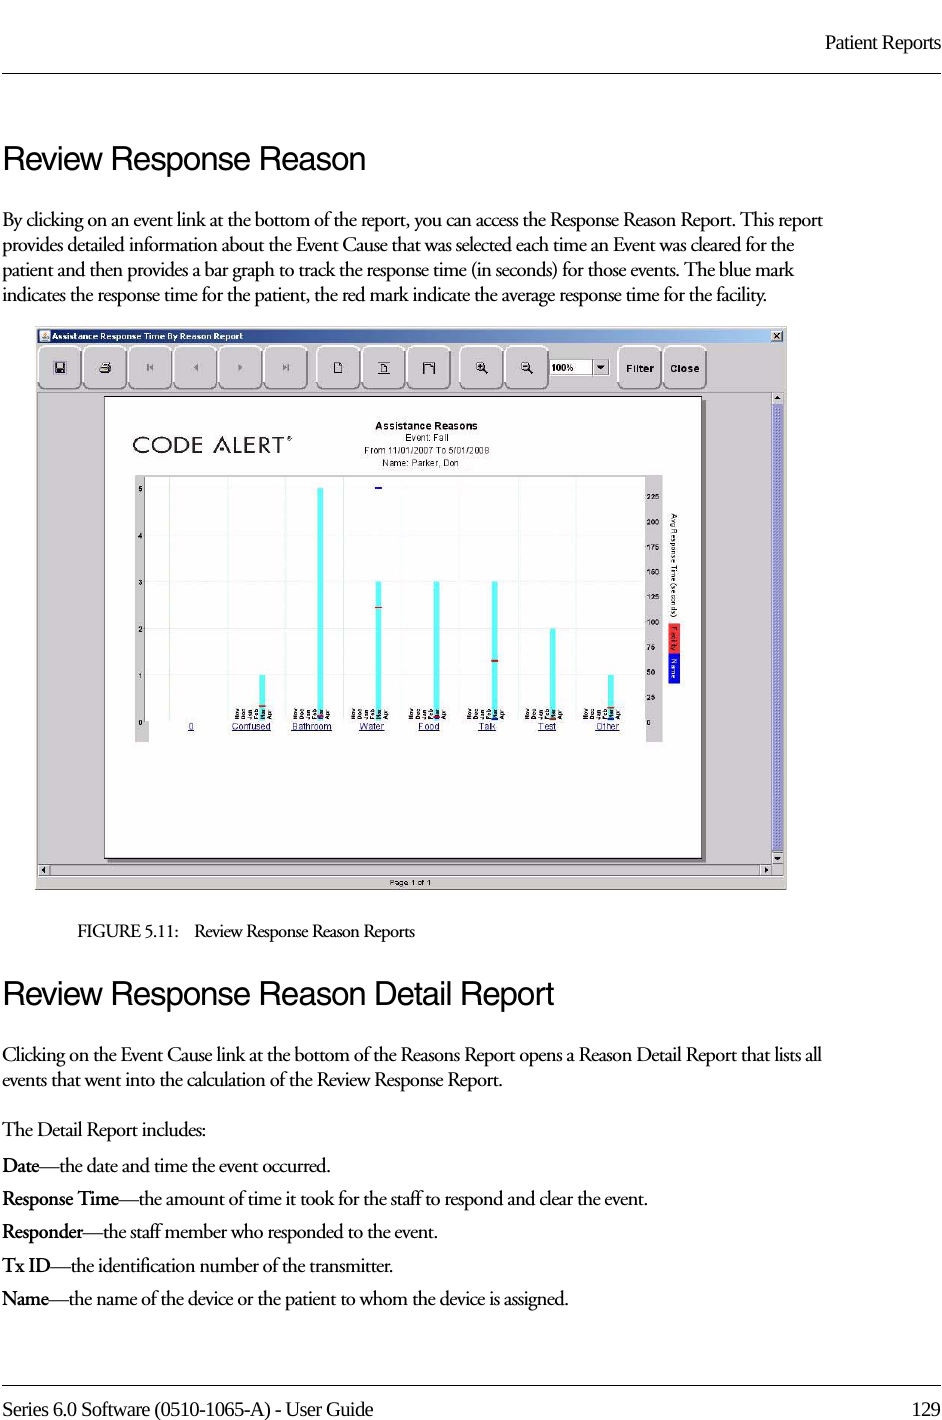 Series 6.0 Software (0510-1065-A) - User Guide  129Patient ReportsReview Response ReasonBy clicking on an event link at the bottom of the report, you can access the Response Reason Report. This report provides detailed information about the Event Cause that was selected each time an Event was cleared for the patient and then provides a bar graph to track the response time (in seconds) for those events. The blue mark indicates the response time for the patient, the red mark indicate the average response time for the facility. FIGURE 5.11:    Review Response Reason ReportsReview Response Reason Detail ReportClicking on the Event Cause link at the bottom of the Reasons Report opens a Reason Detail Report that lists all events that went into the calculation of the Review Response Report. The Detail Report includes:Date—the date and time the event occurred.Response Time—the amount of time it took for the staff to respond and clear the event.Responder—the staff member who responded to the event. Tx ID—the identification number of the transmitter.Name—the name of the device or the patient to whom the device is assigned.